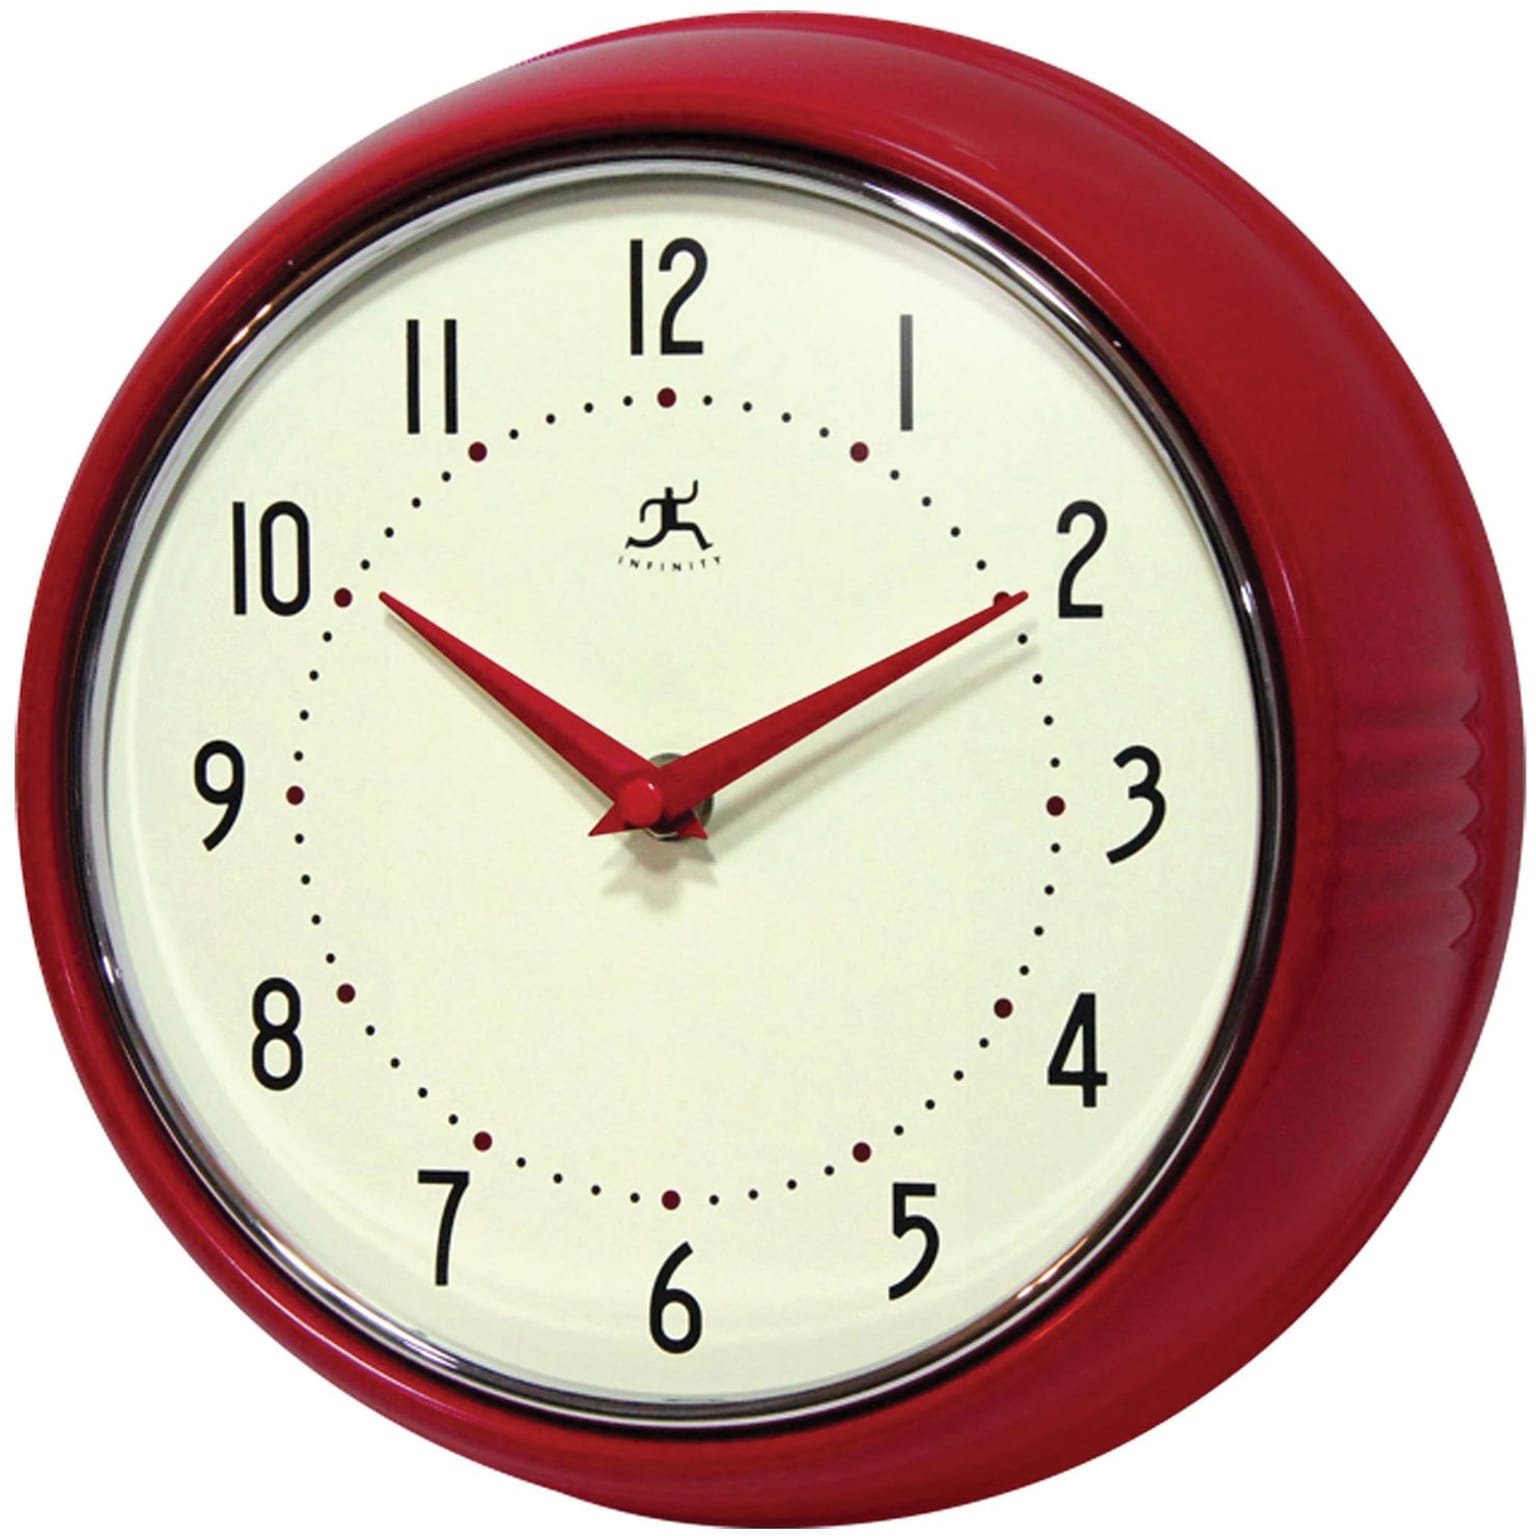 Infinity Instruments Home Essential Retro Wall Clock, Red Steel, 9.5 (10940-RED)